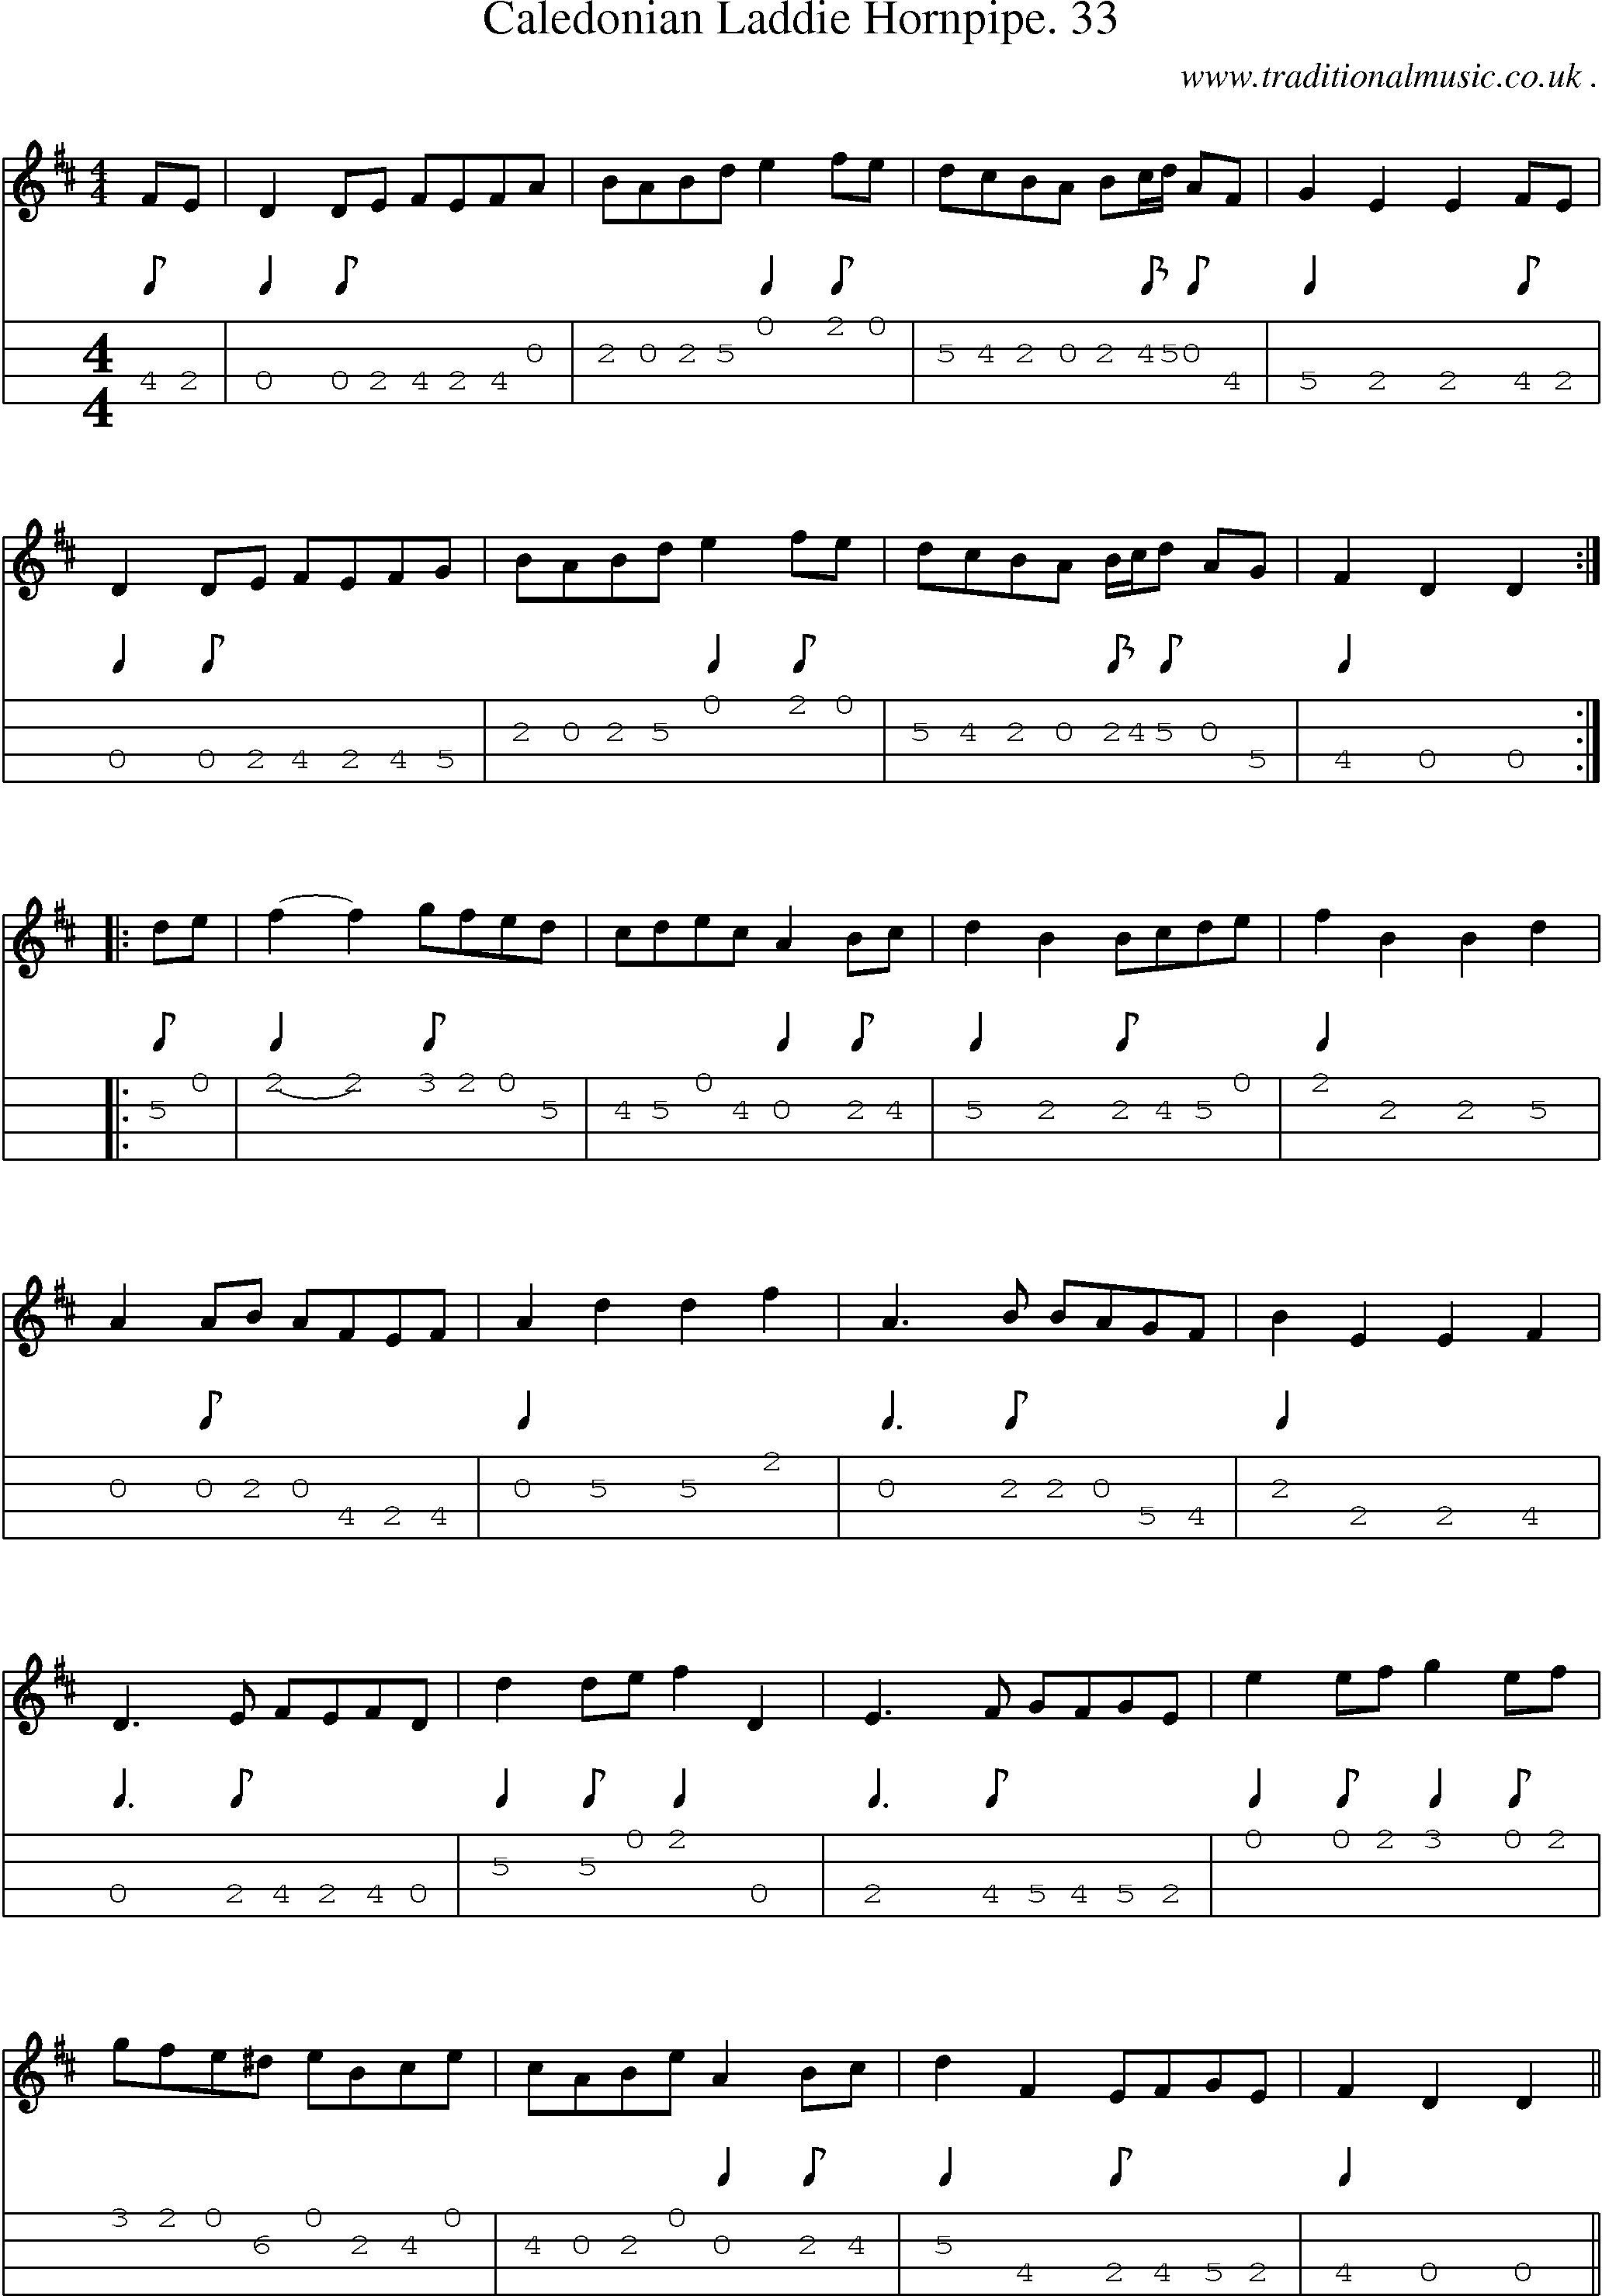 Sheet-Music and Mandolin Tabs for Caledonian Laddie Hornpipe 33